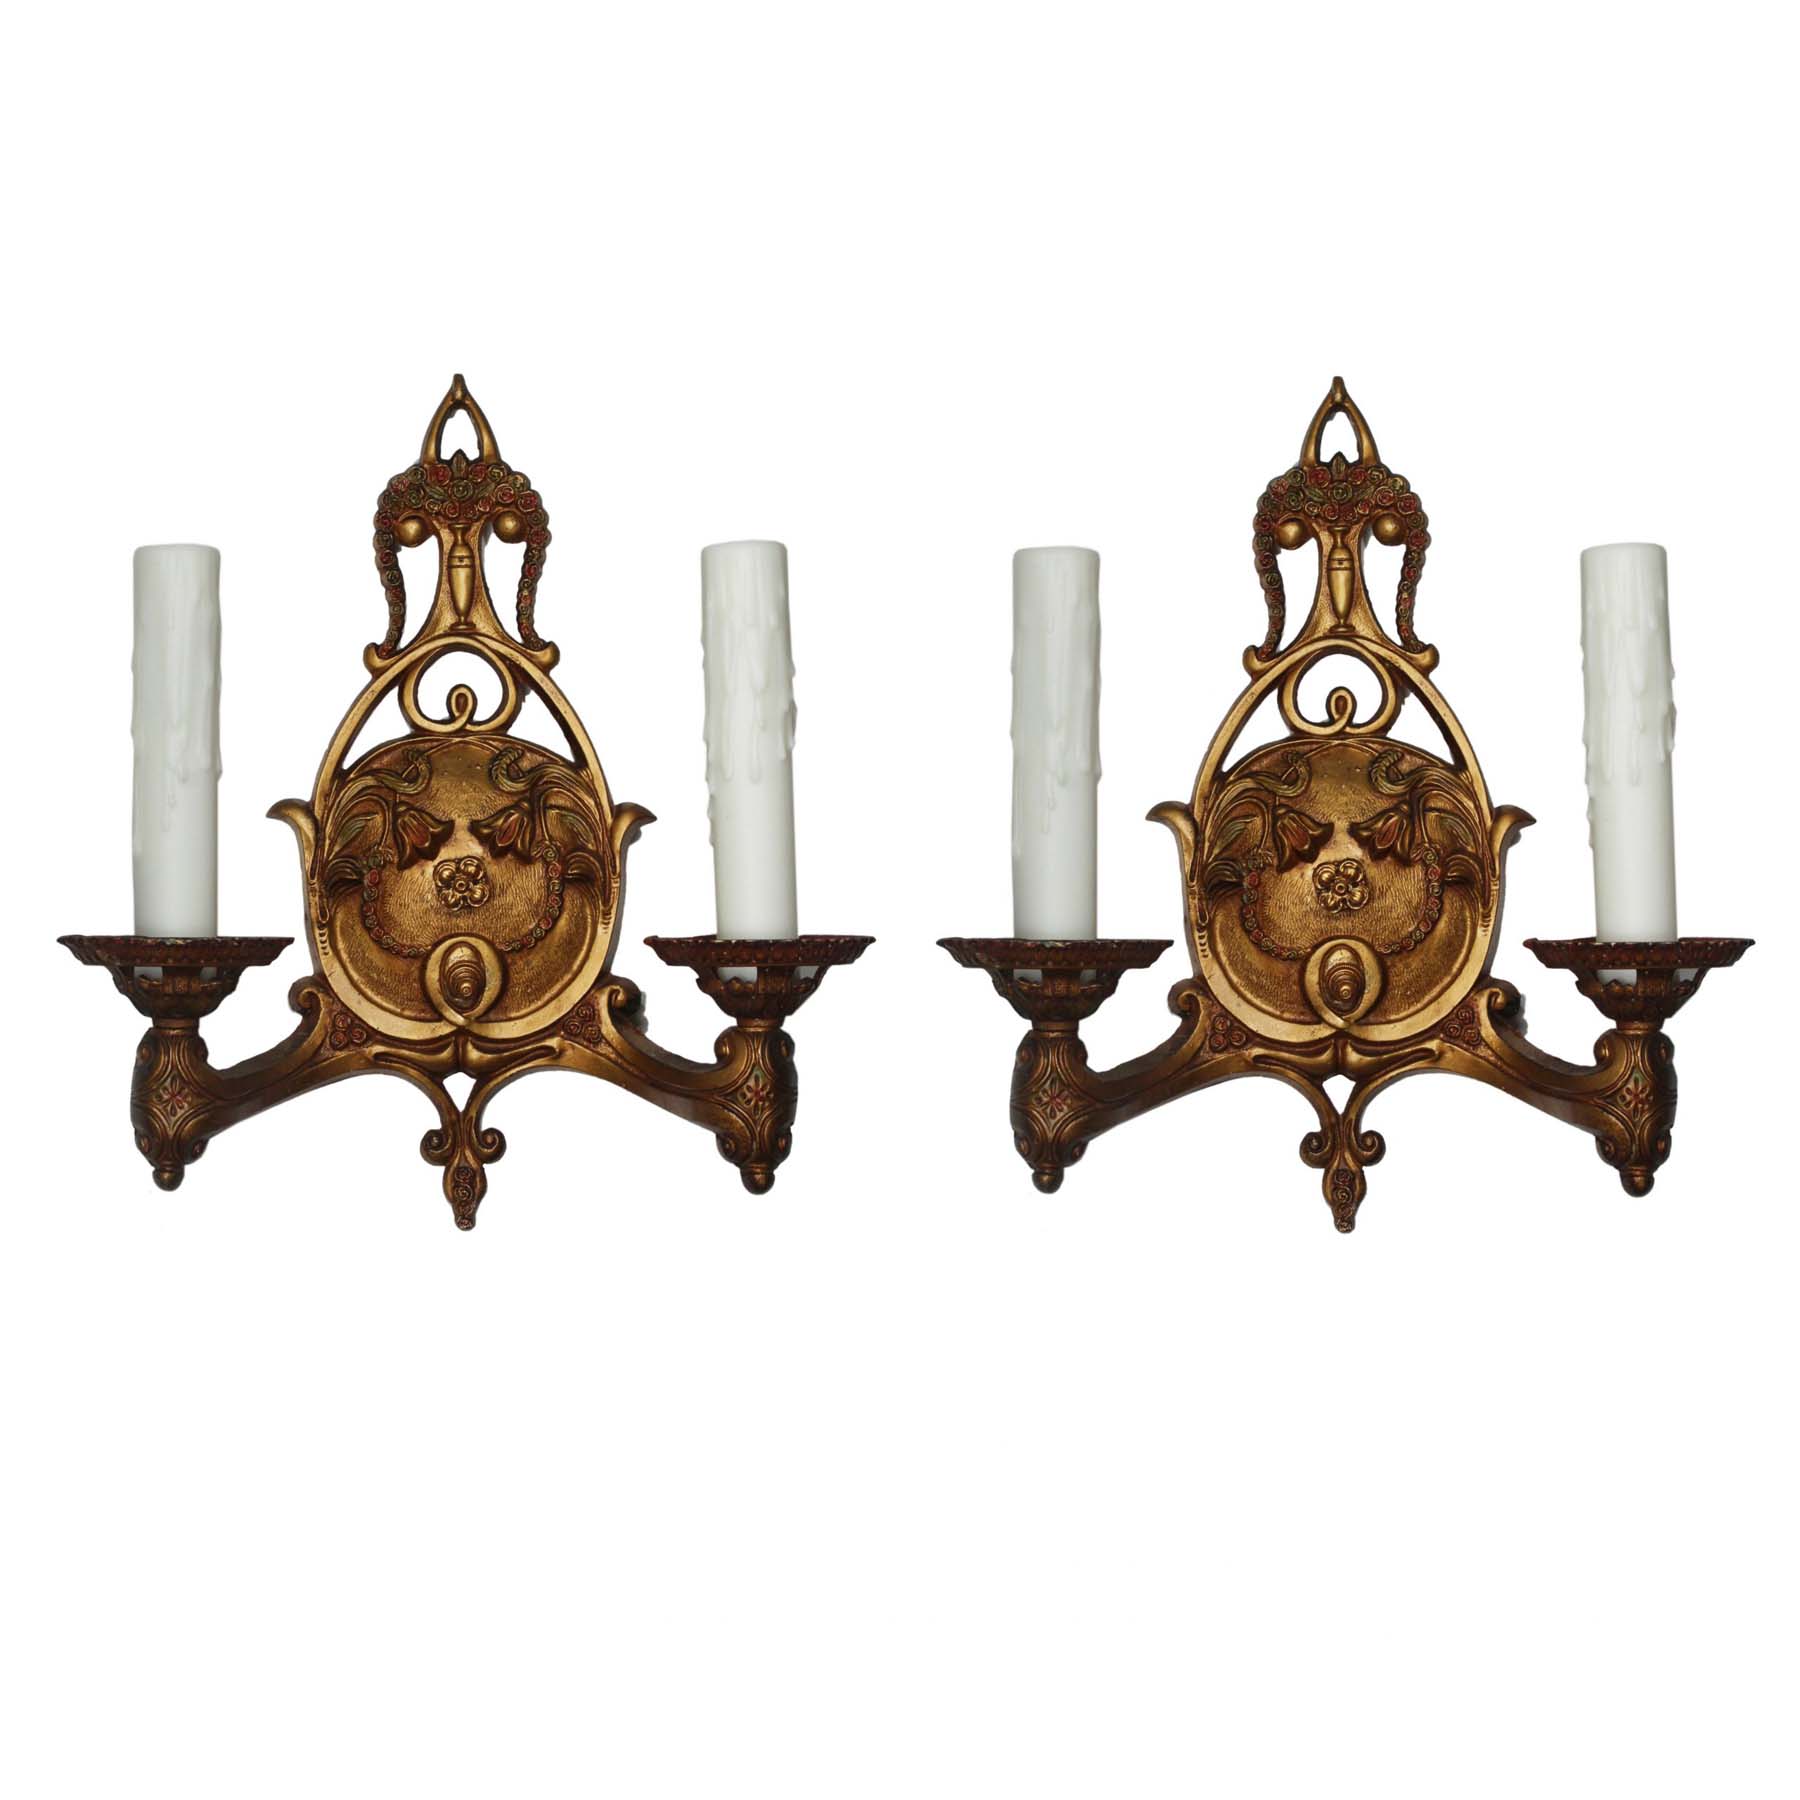 Neoclassical Double Arm Sconces with Original Polychrome, Antique Lighting-0